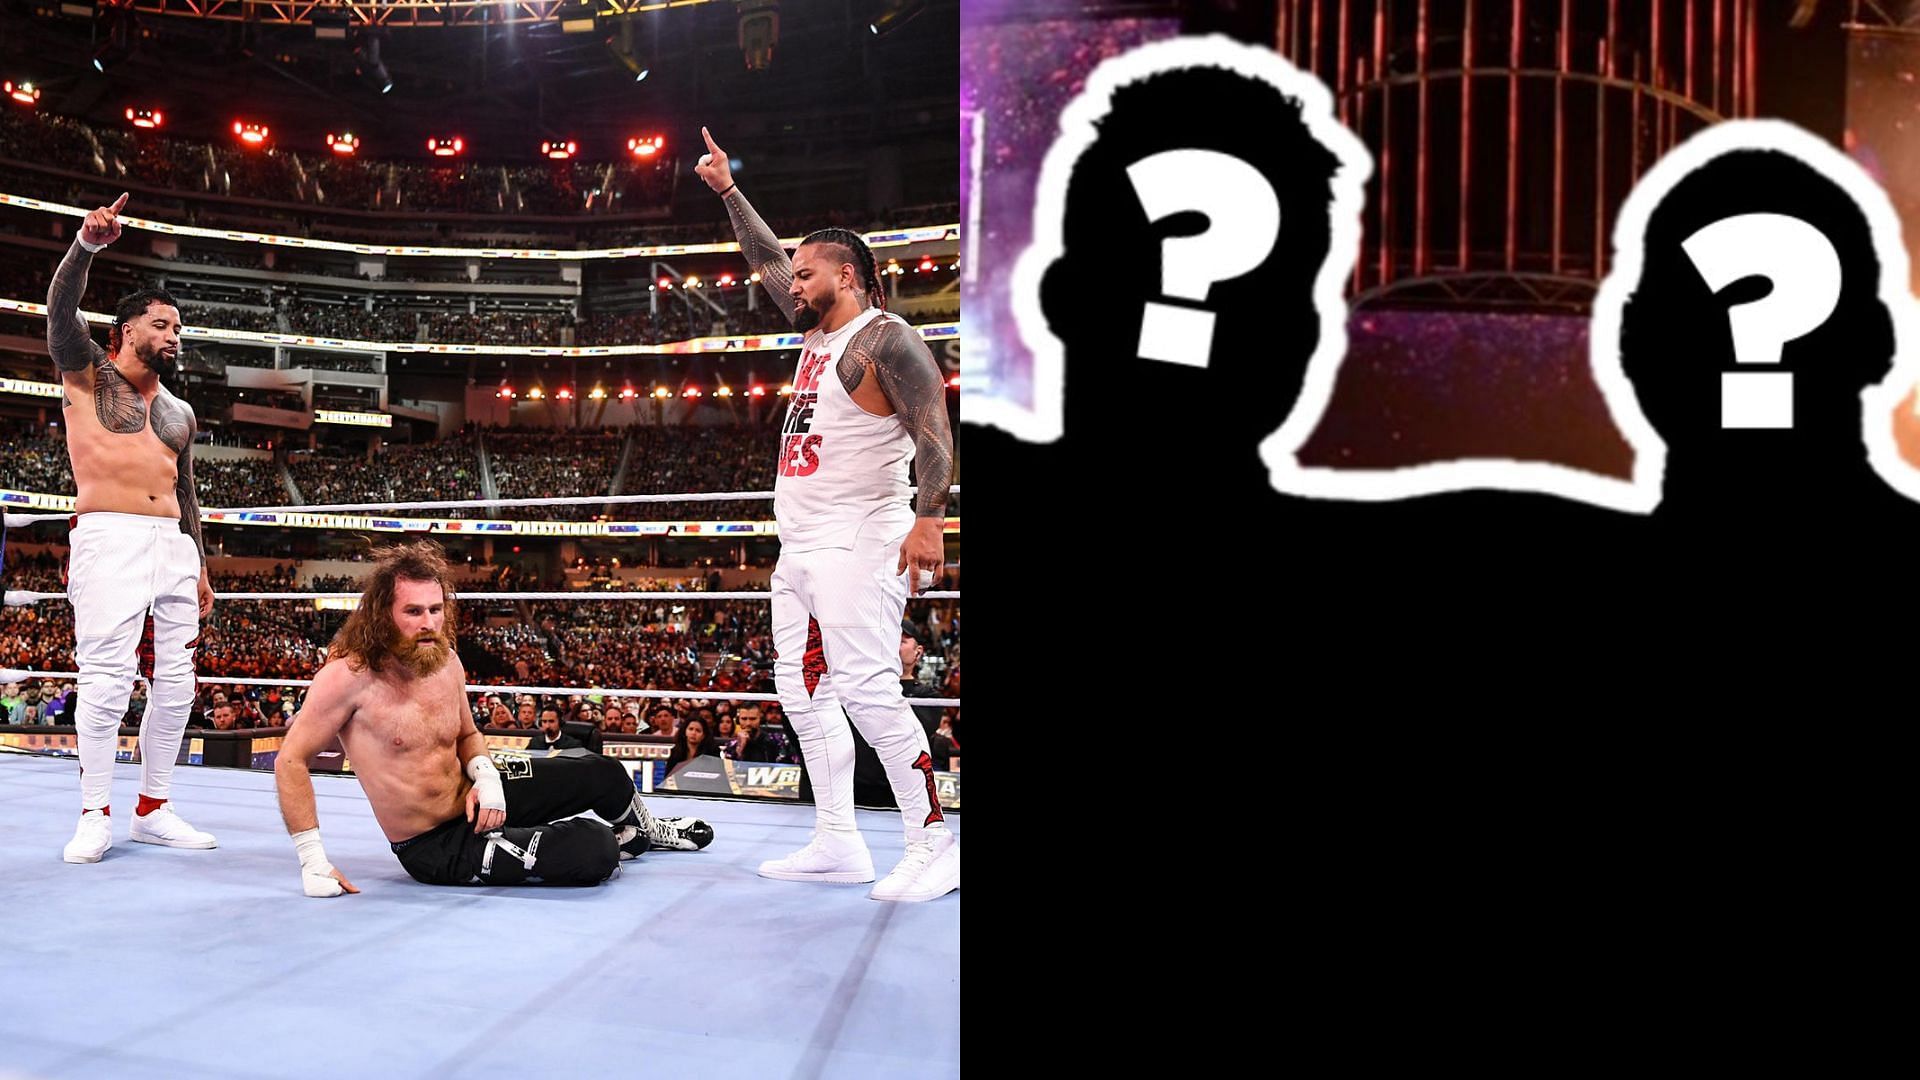 Where do the former record tag team champions go from here?